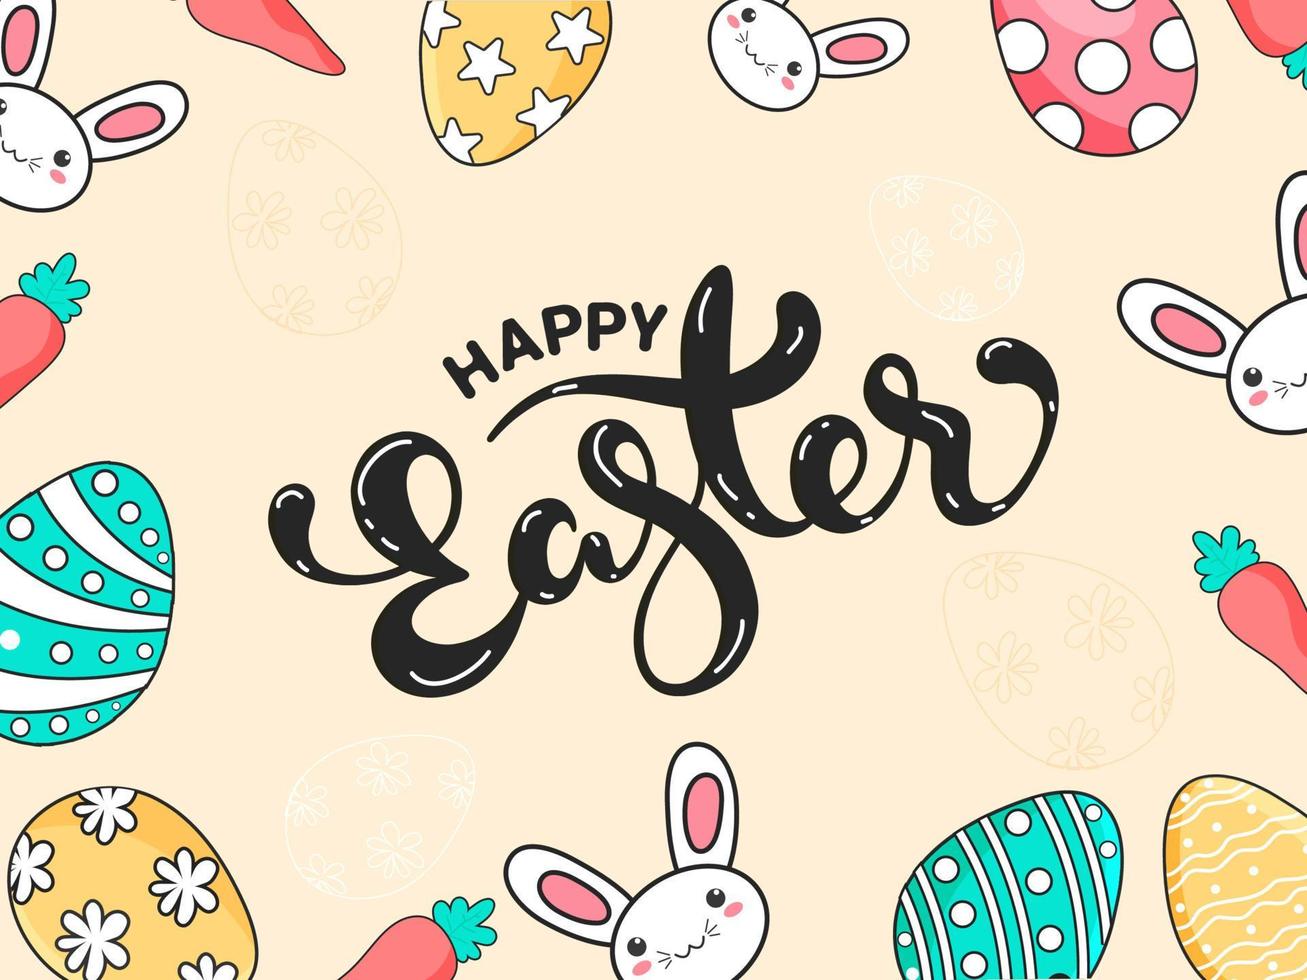 Happy Easter Calligraphy on Pastel Brown Background Decorated with Cartoon Bunny Face, Carrot and Painted Eggs. vector